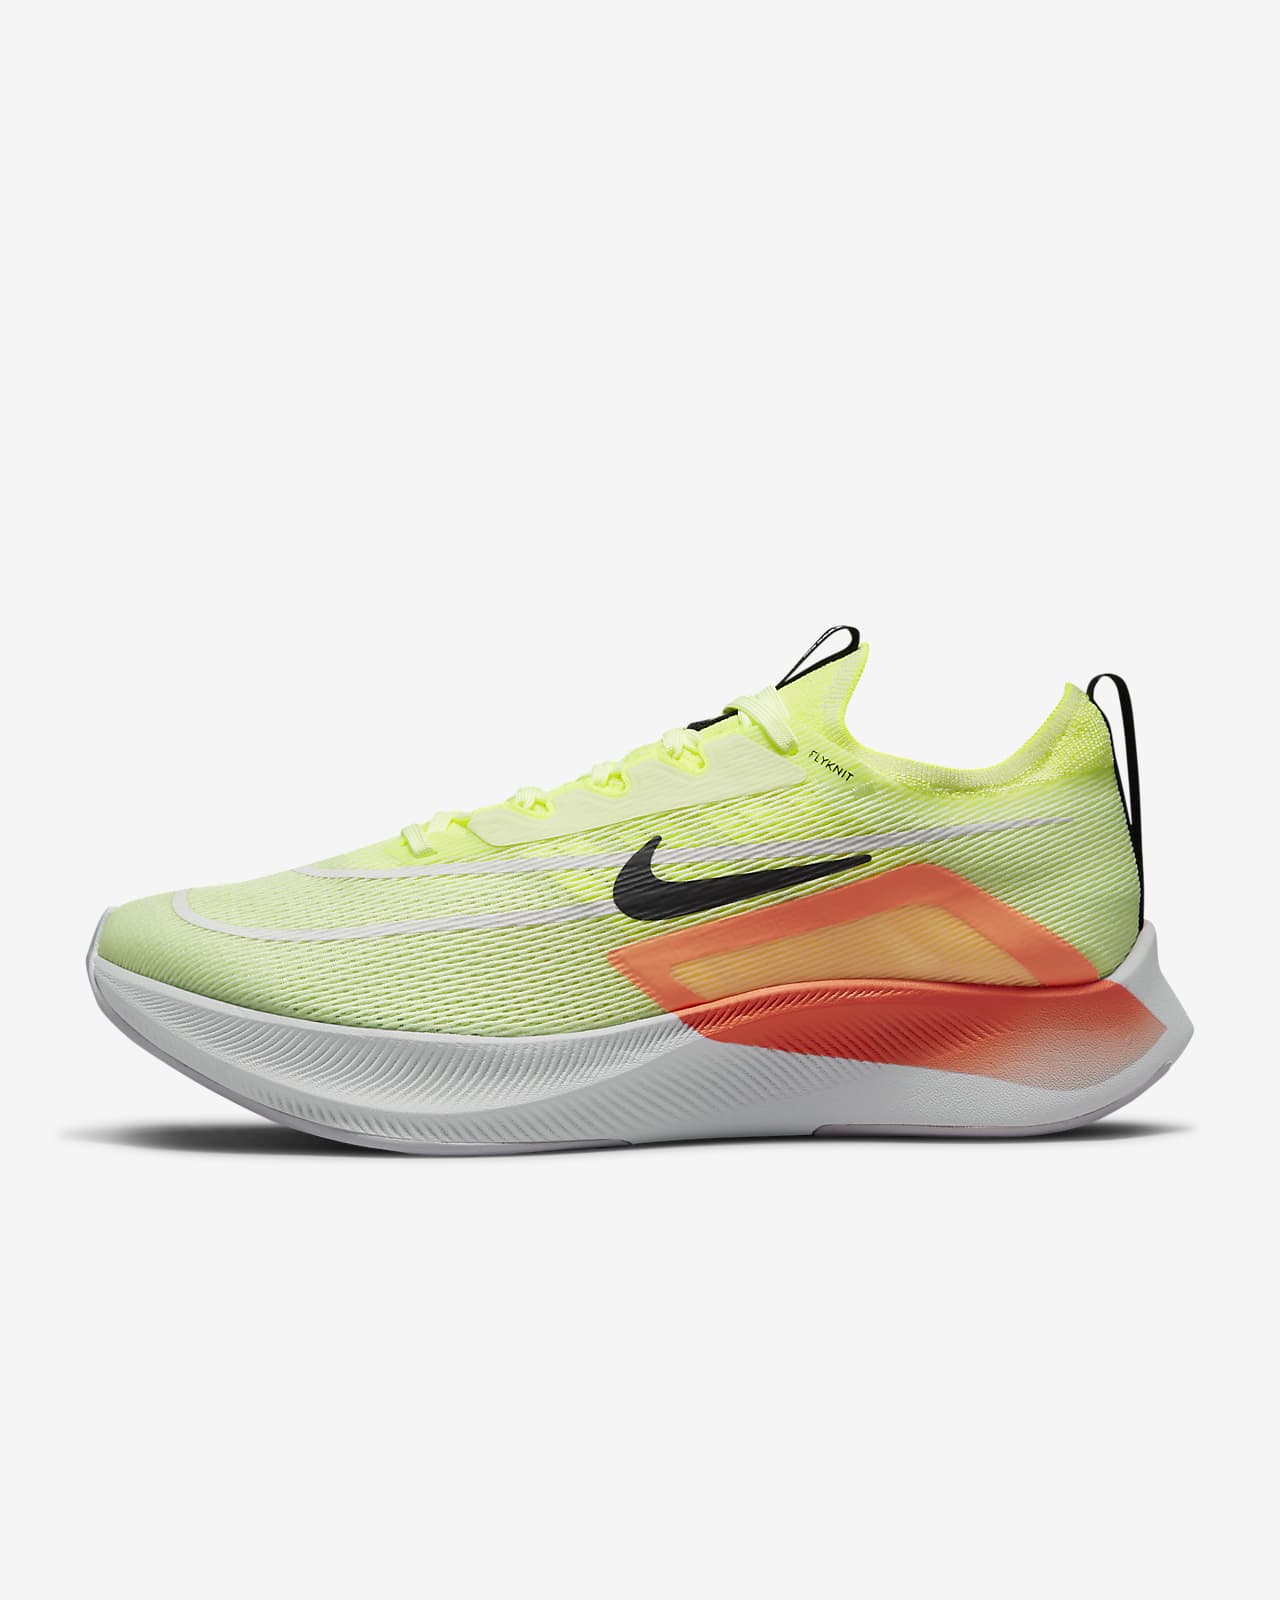 Chaussures de running sur route Nike Zoom Fly 4 pour Homme